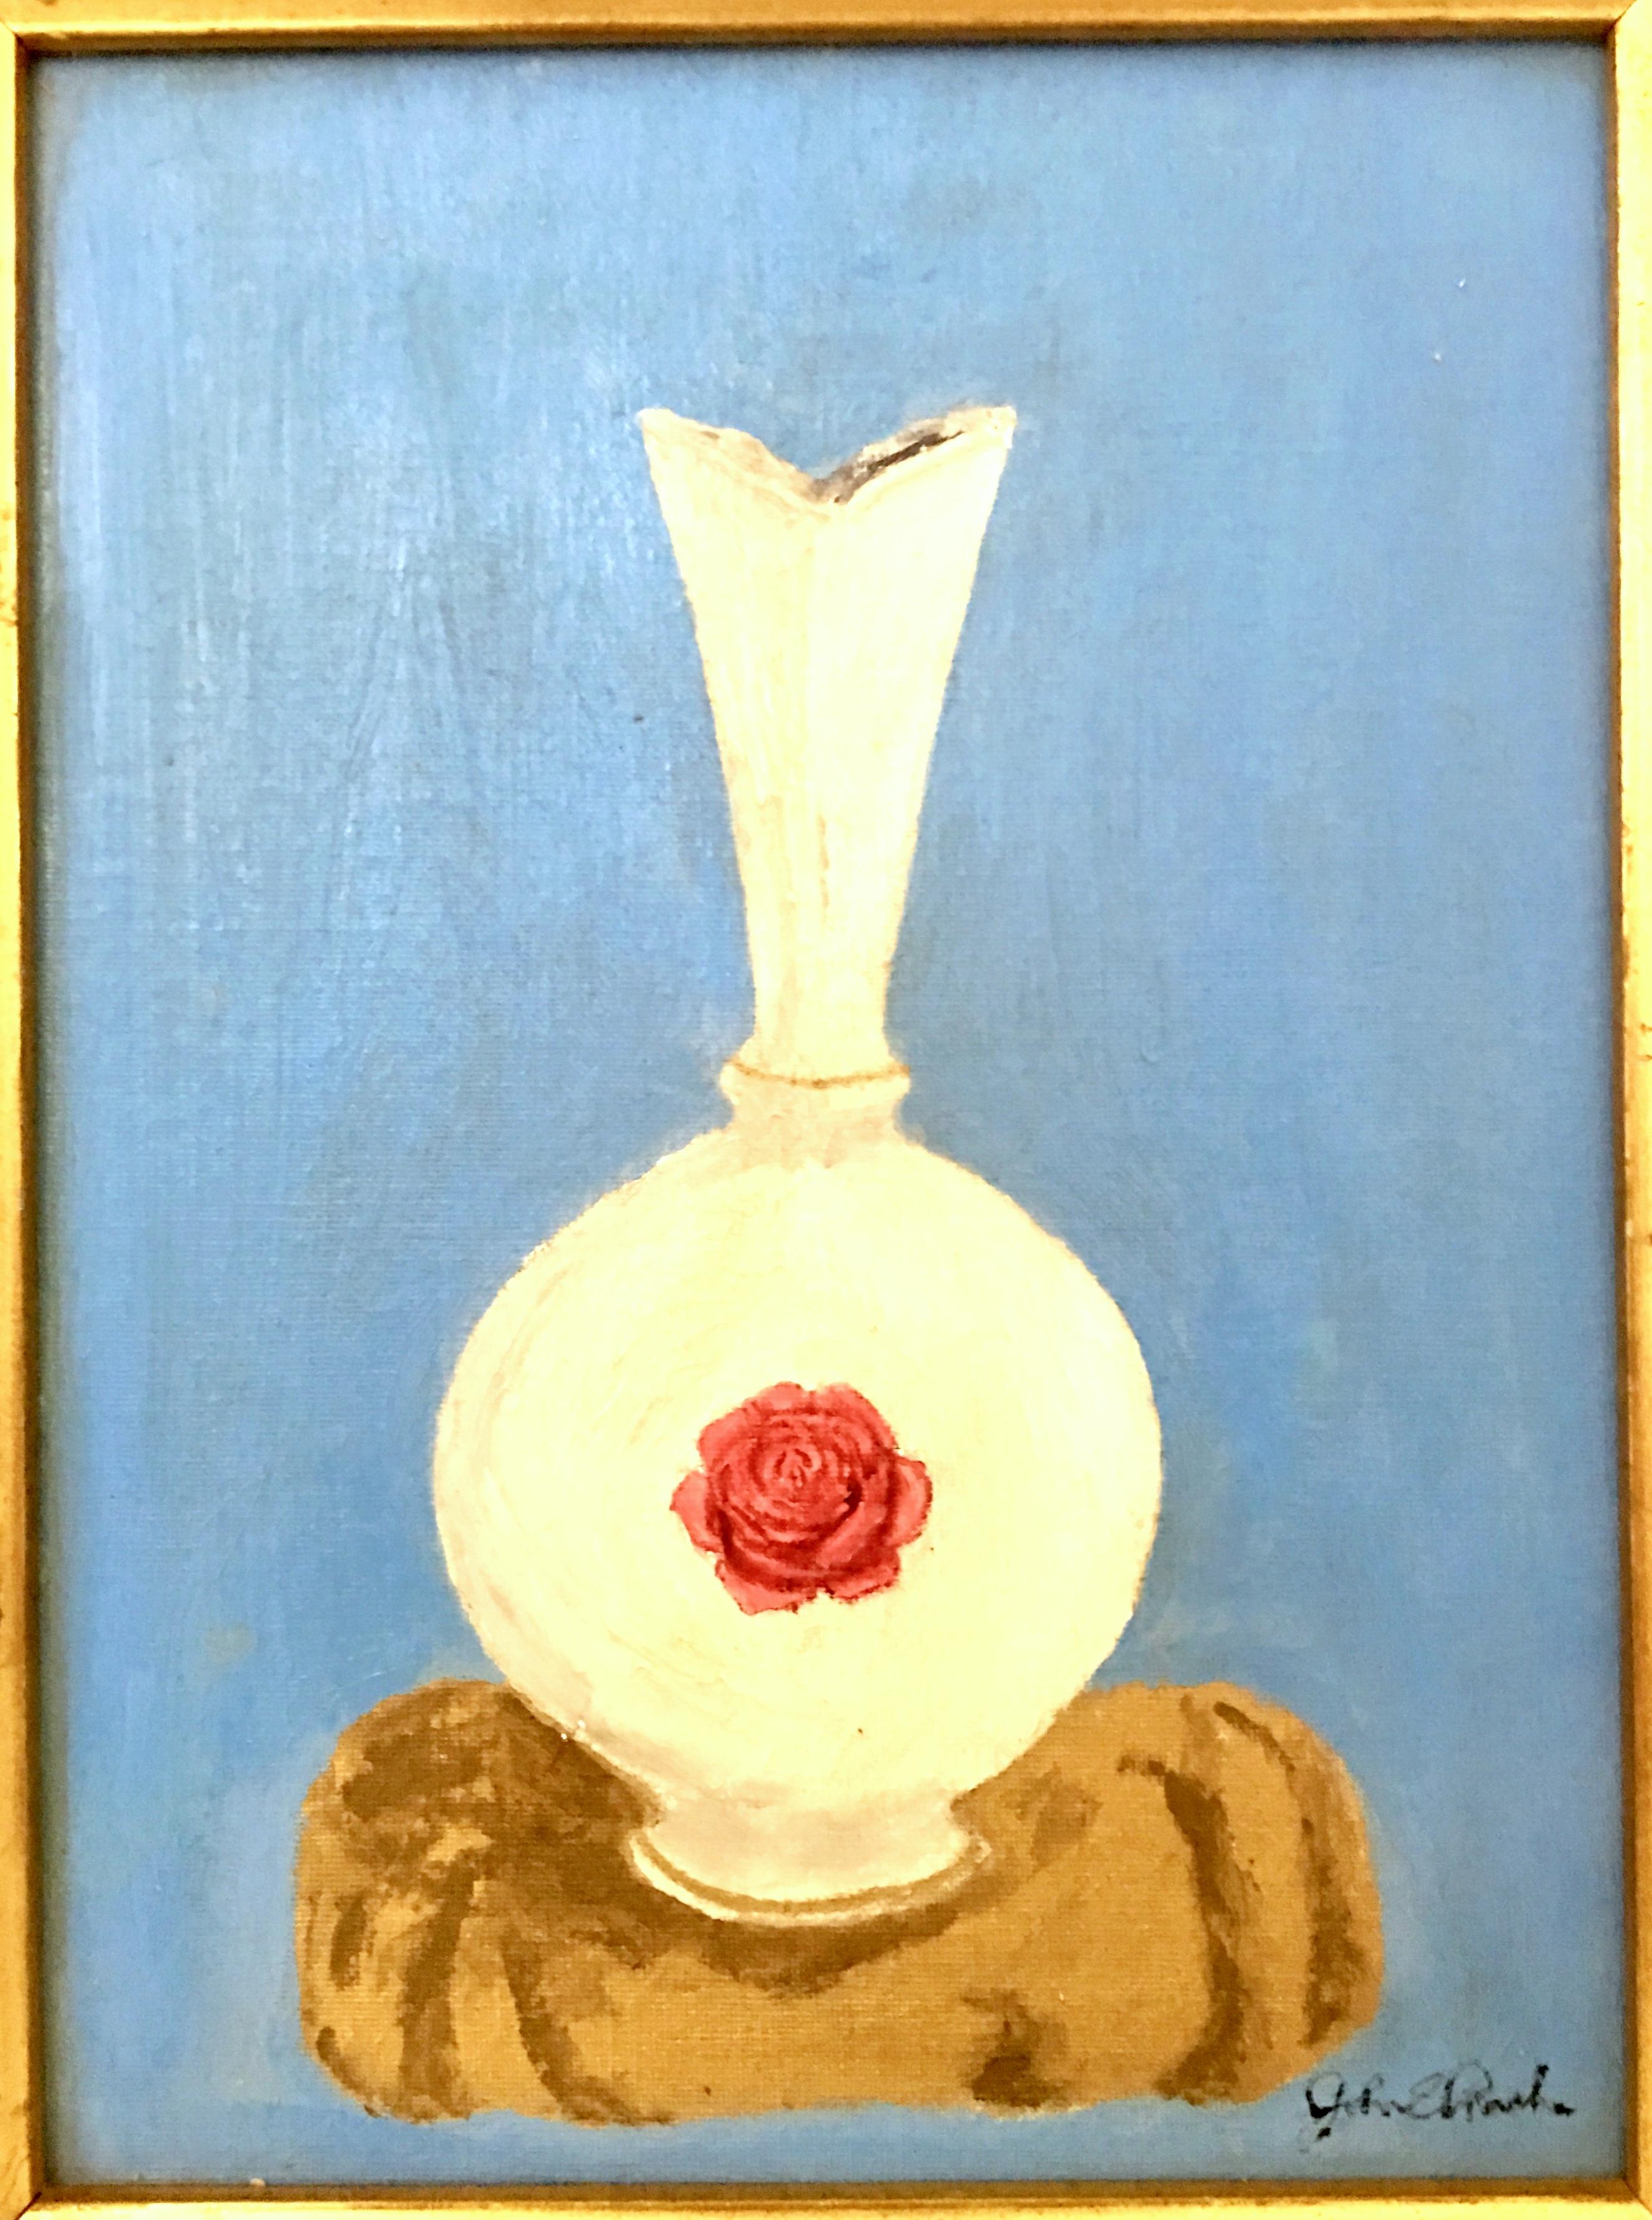 20th Century original oil on canvas still life painting -signed. This original impasto still life oil on canvas painting features a periwinkle ground with a metallic gold table with a white vase of pink flowers. Framed in a carved gilt wood frame